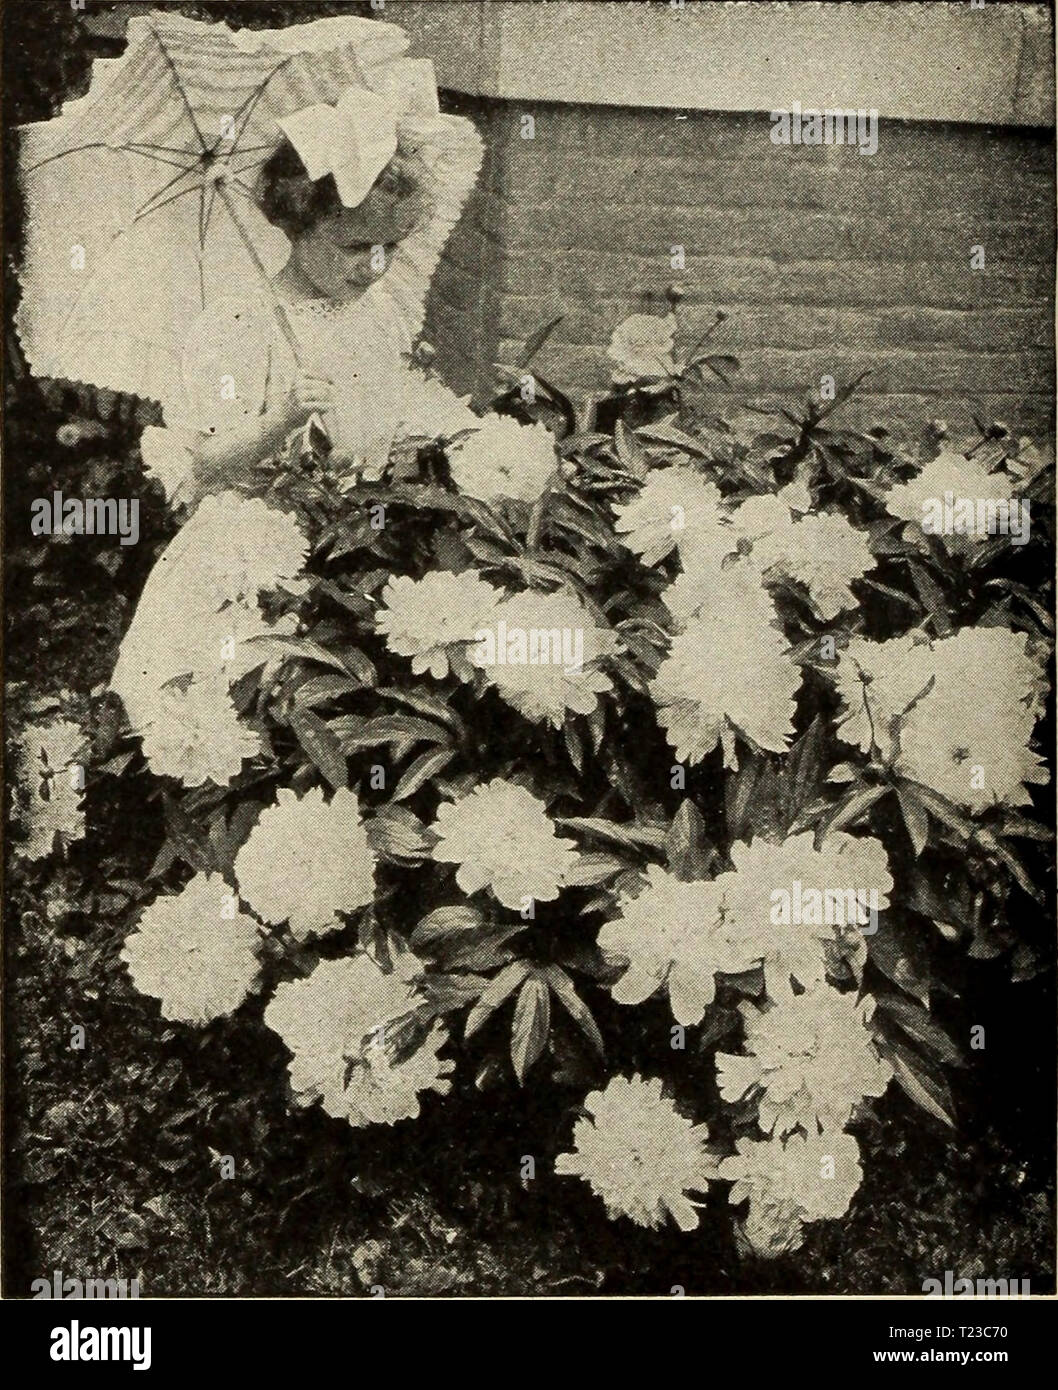 Archive image from page 93 of Dingee guide to rose culture Dingee guide to rose culture  dingeeguidetoros19ding 7 Year: 1916  Peony. New and Rare Peonies Price, strong roots, 50c each. Set of 8 superb varieties, postpaid, for $3.25. Edulis Superba—Red. Faust—Delicate light pink. Felix Crousse—Brilliant red. Extra fine, Humei Carnea—Light rose, passing into white. Insignis—Beautiful violet pink. Jeanne D'Arc—Pure white. Nobilissima—Dark violet red. Festiva Maxima—White center, flaked red. Double Peonies Price, 40c each; $3.00 per dozen. Set of 14 varieties, $3.25, prepaid. Candidissima—Creamy w Stock Photo